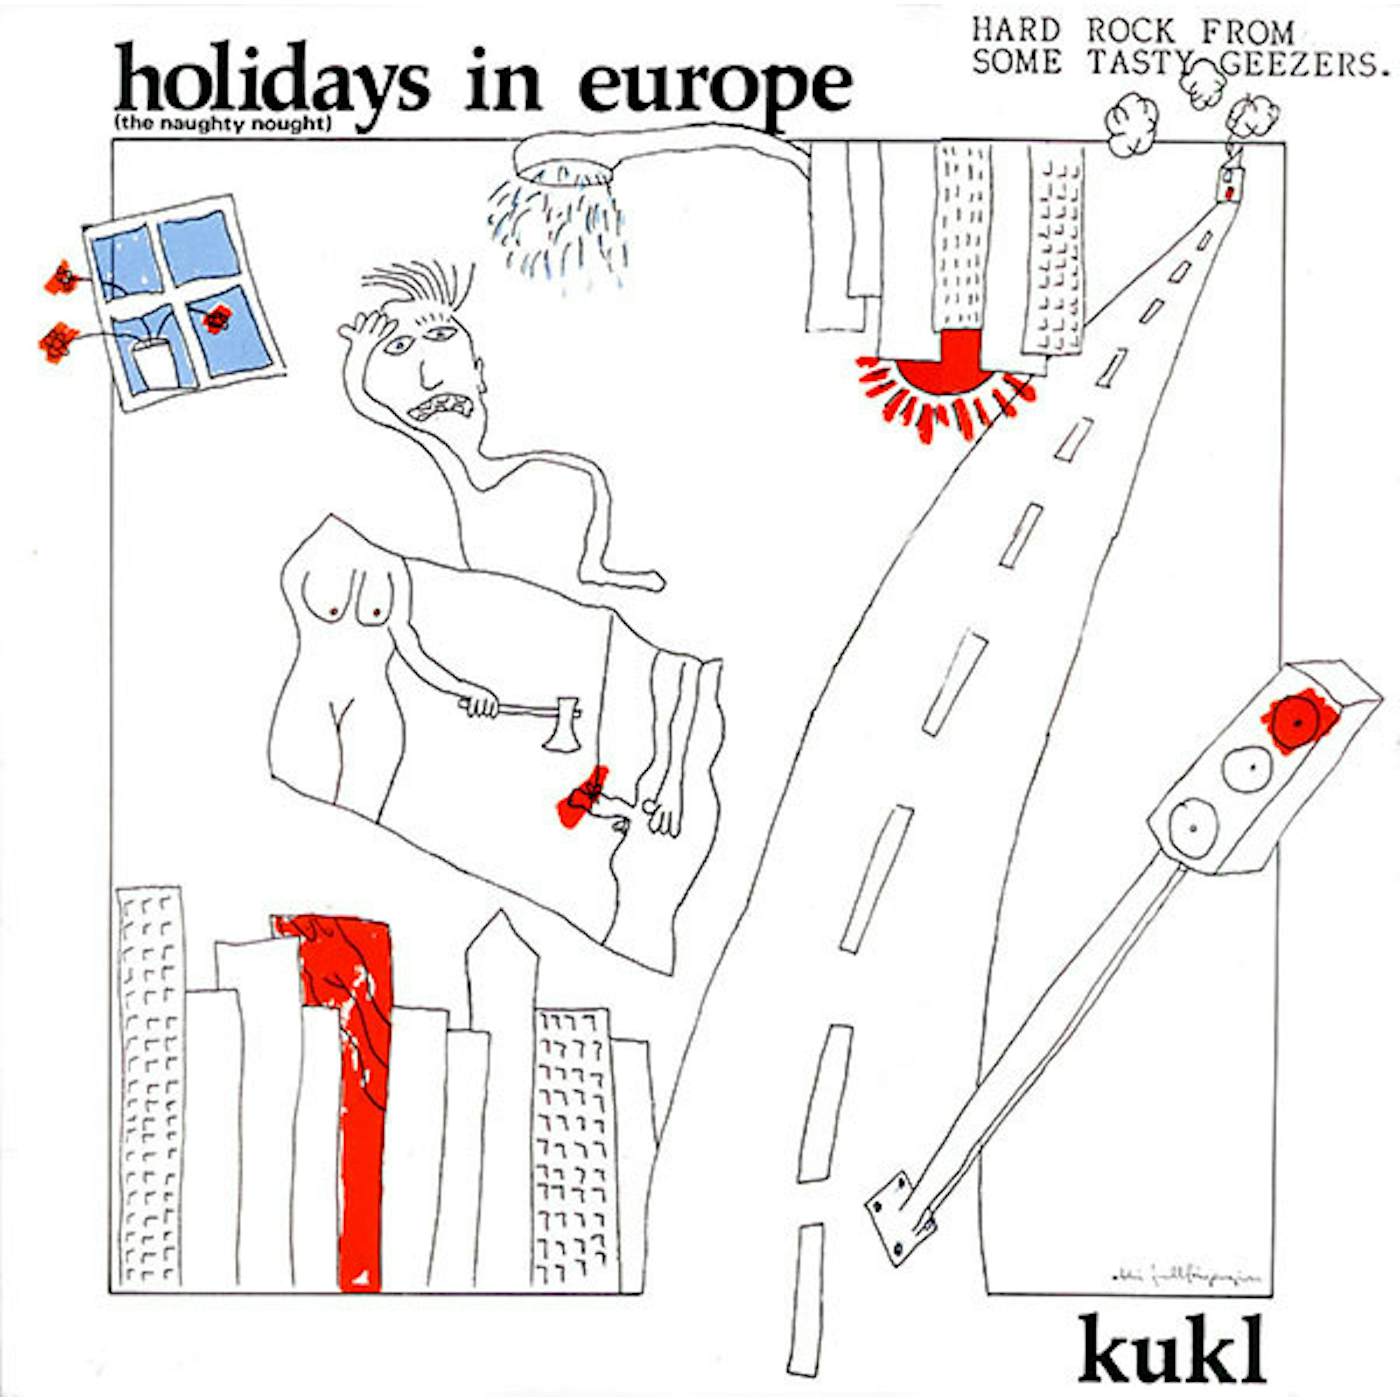 K.U.K.L. Holidays In Europe (The Naughty Nought) (200g DMM/Limited) Vinyl Record